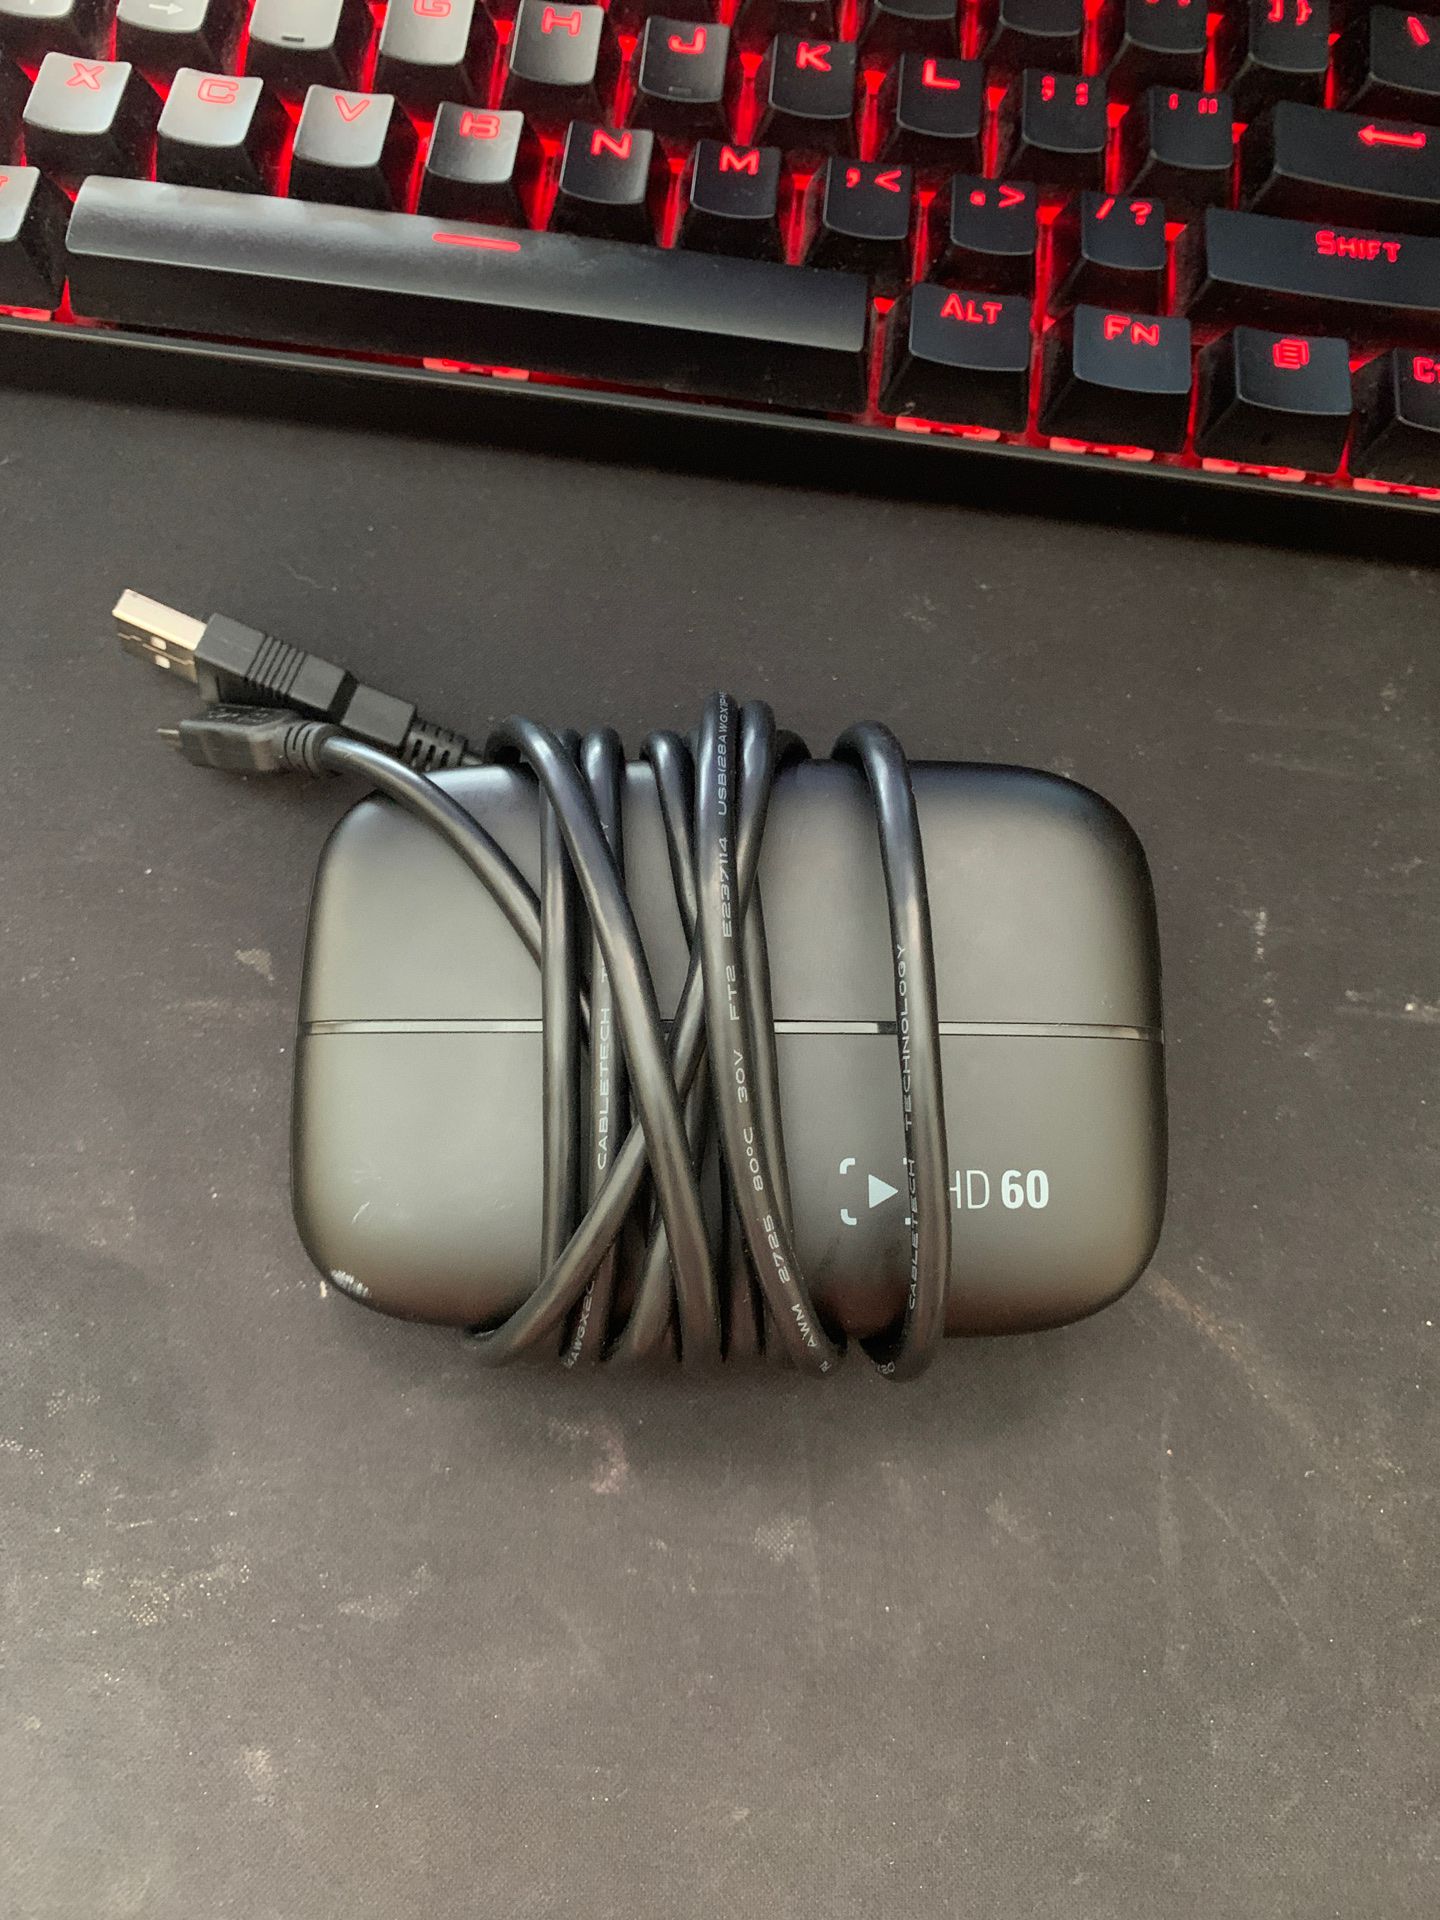 Elgato HD60 (only used once)